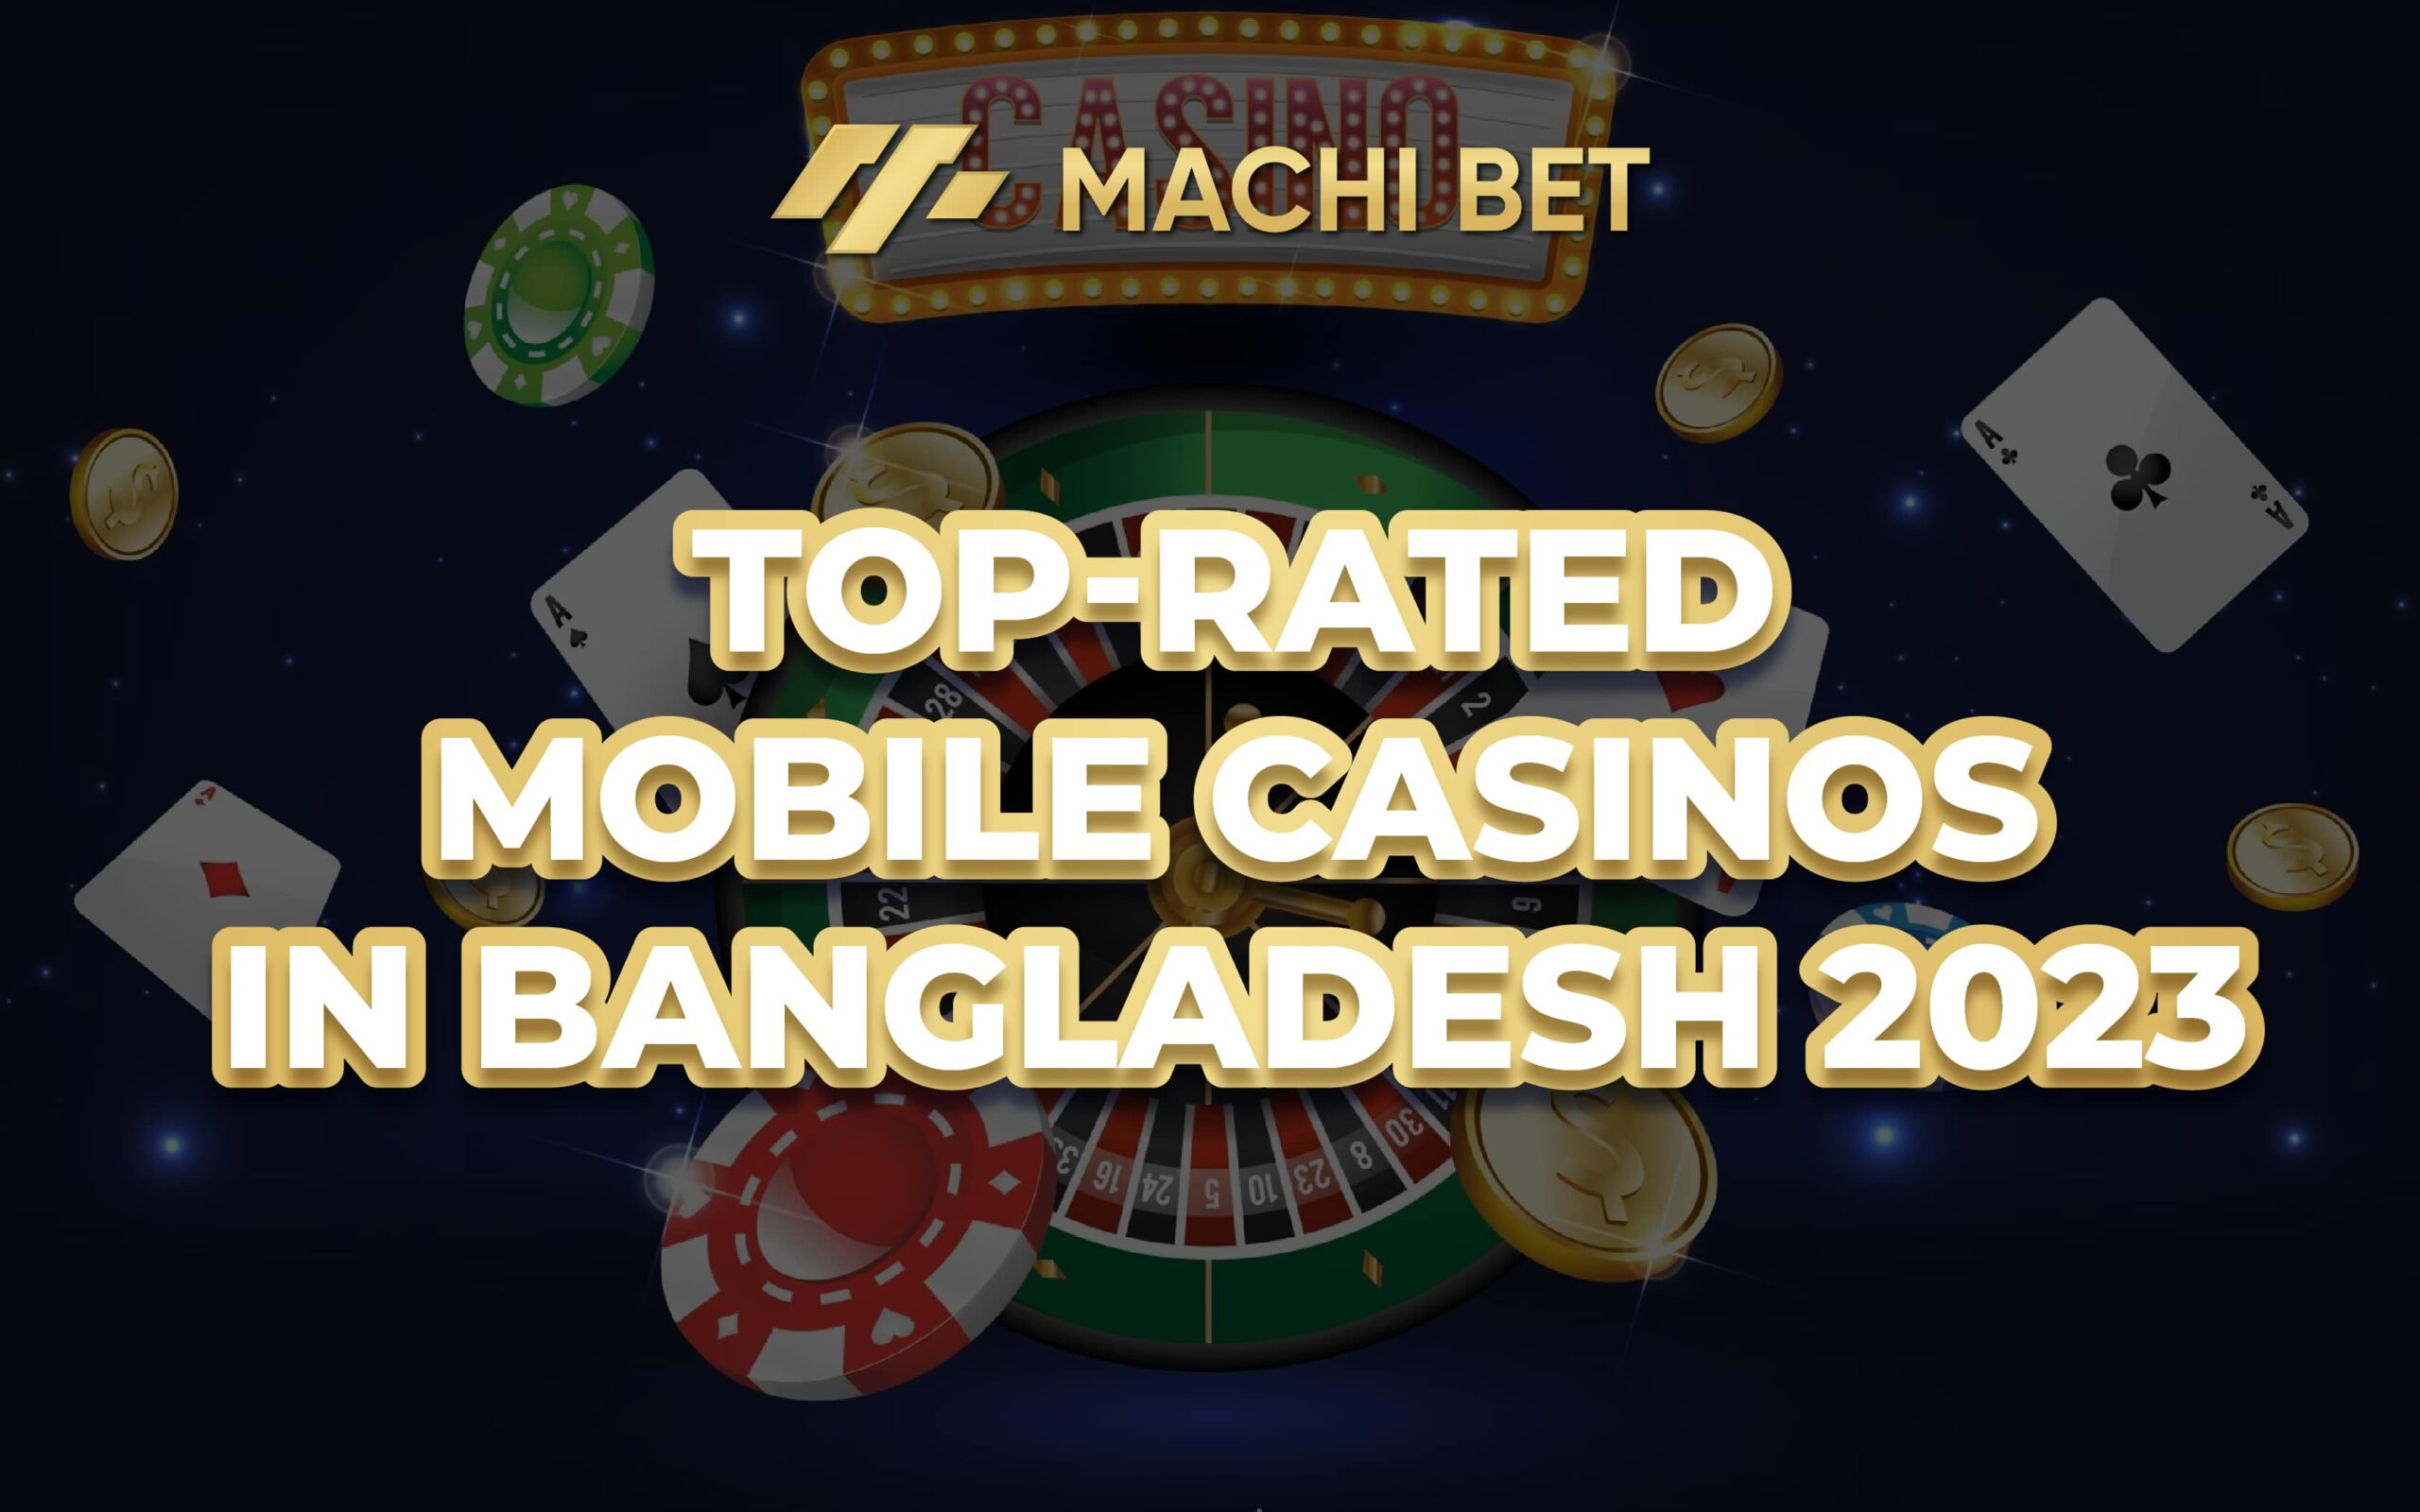 Top rated mobile casinos in Bangladesh